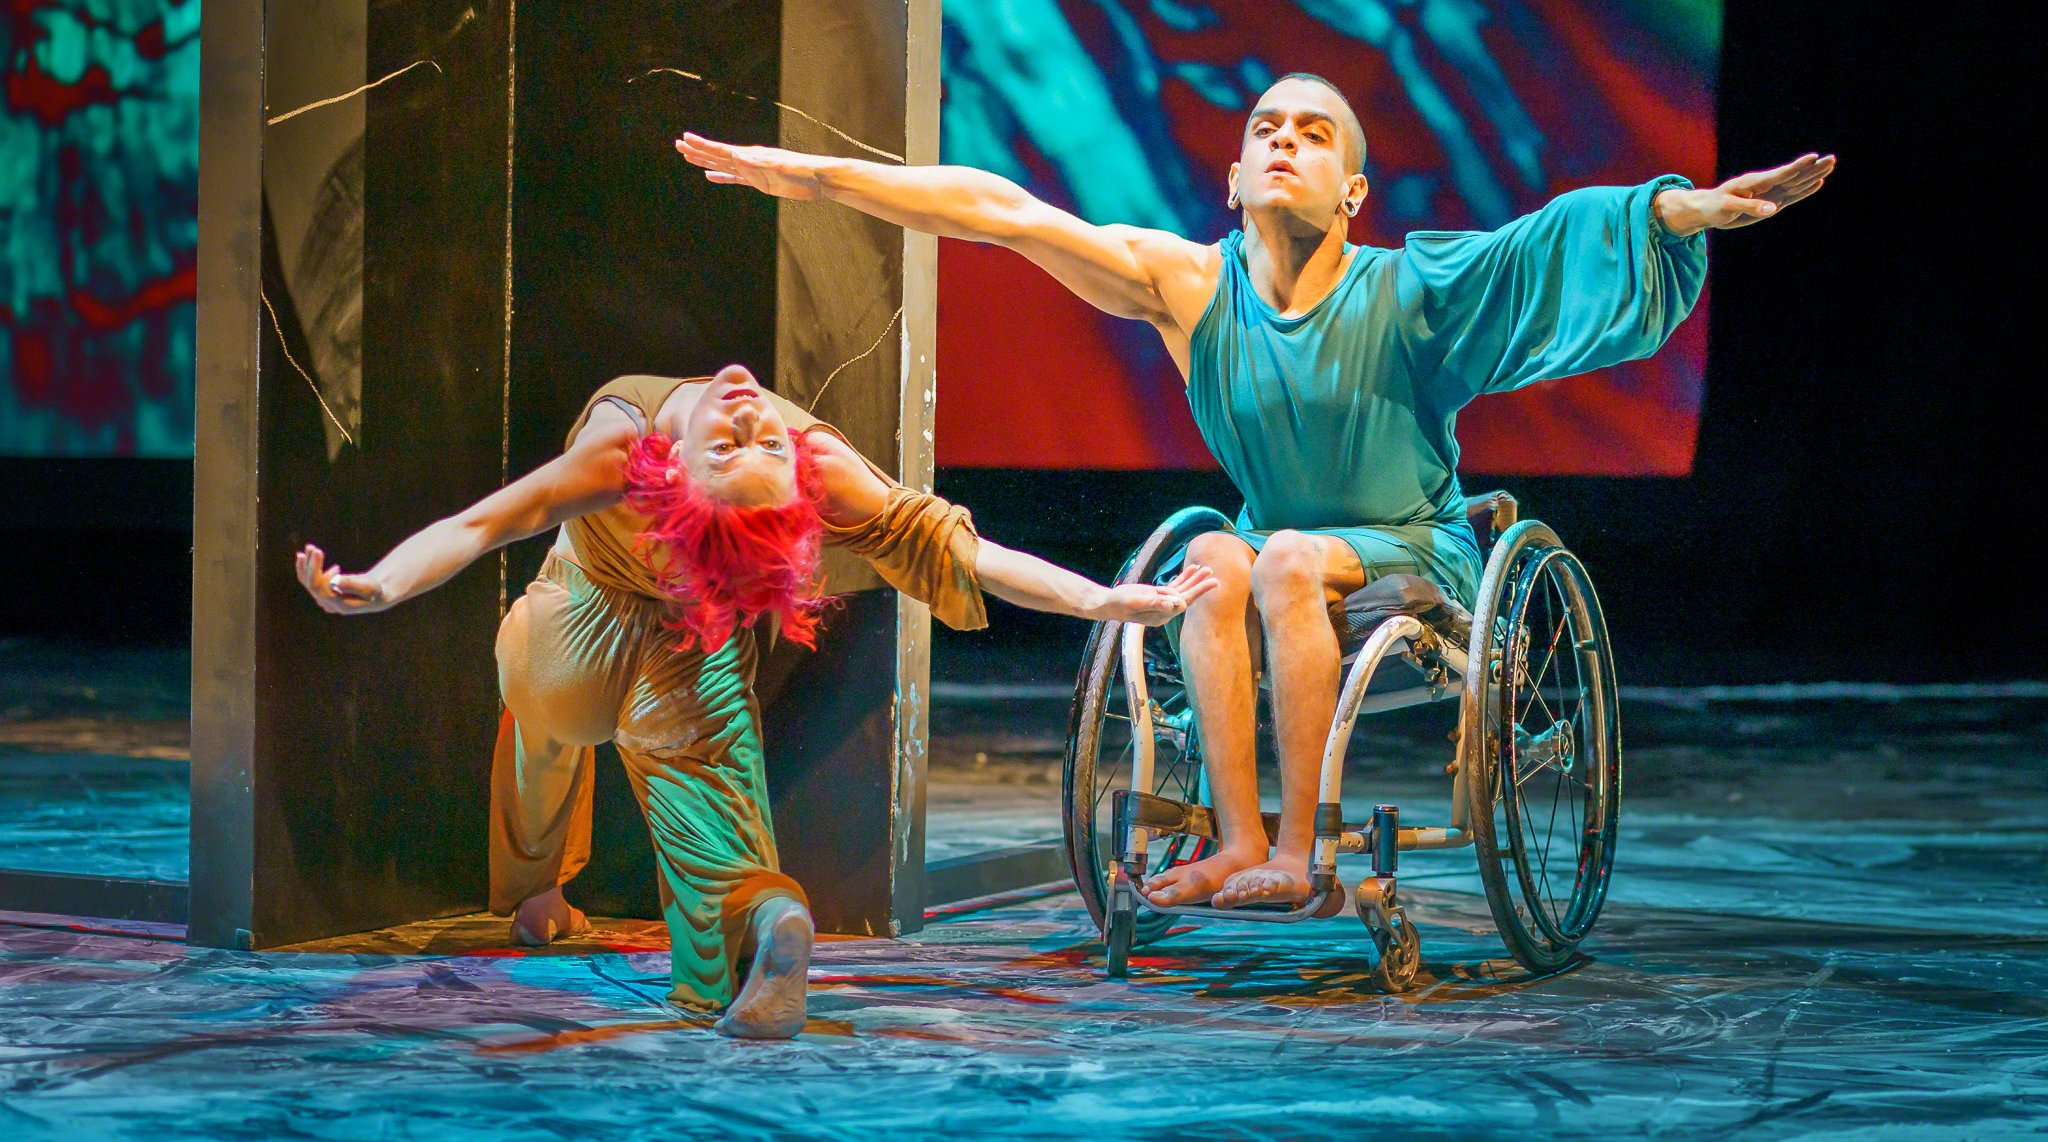 Two dancers on a vibrantly lit stage, one woman on a knee, back toward the audience, in an exxagerated backbend, with bright fuschia hair. The male dancer is in a wheelchair with a focused gaze, arms extended and fingers pointing out.